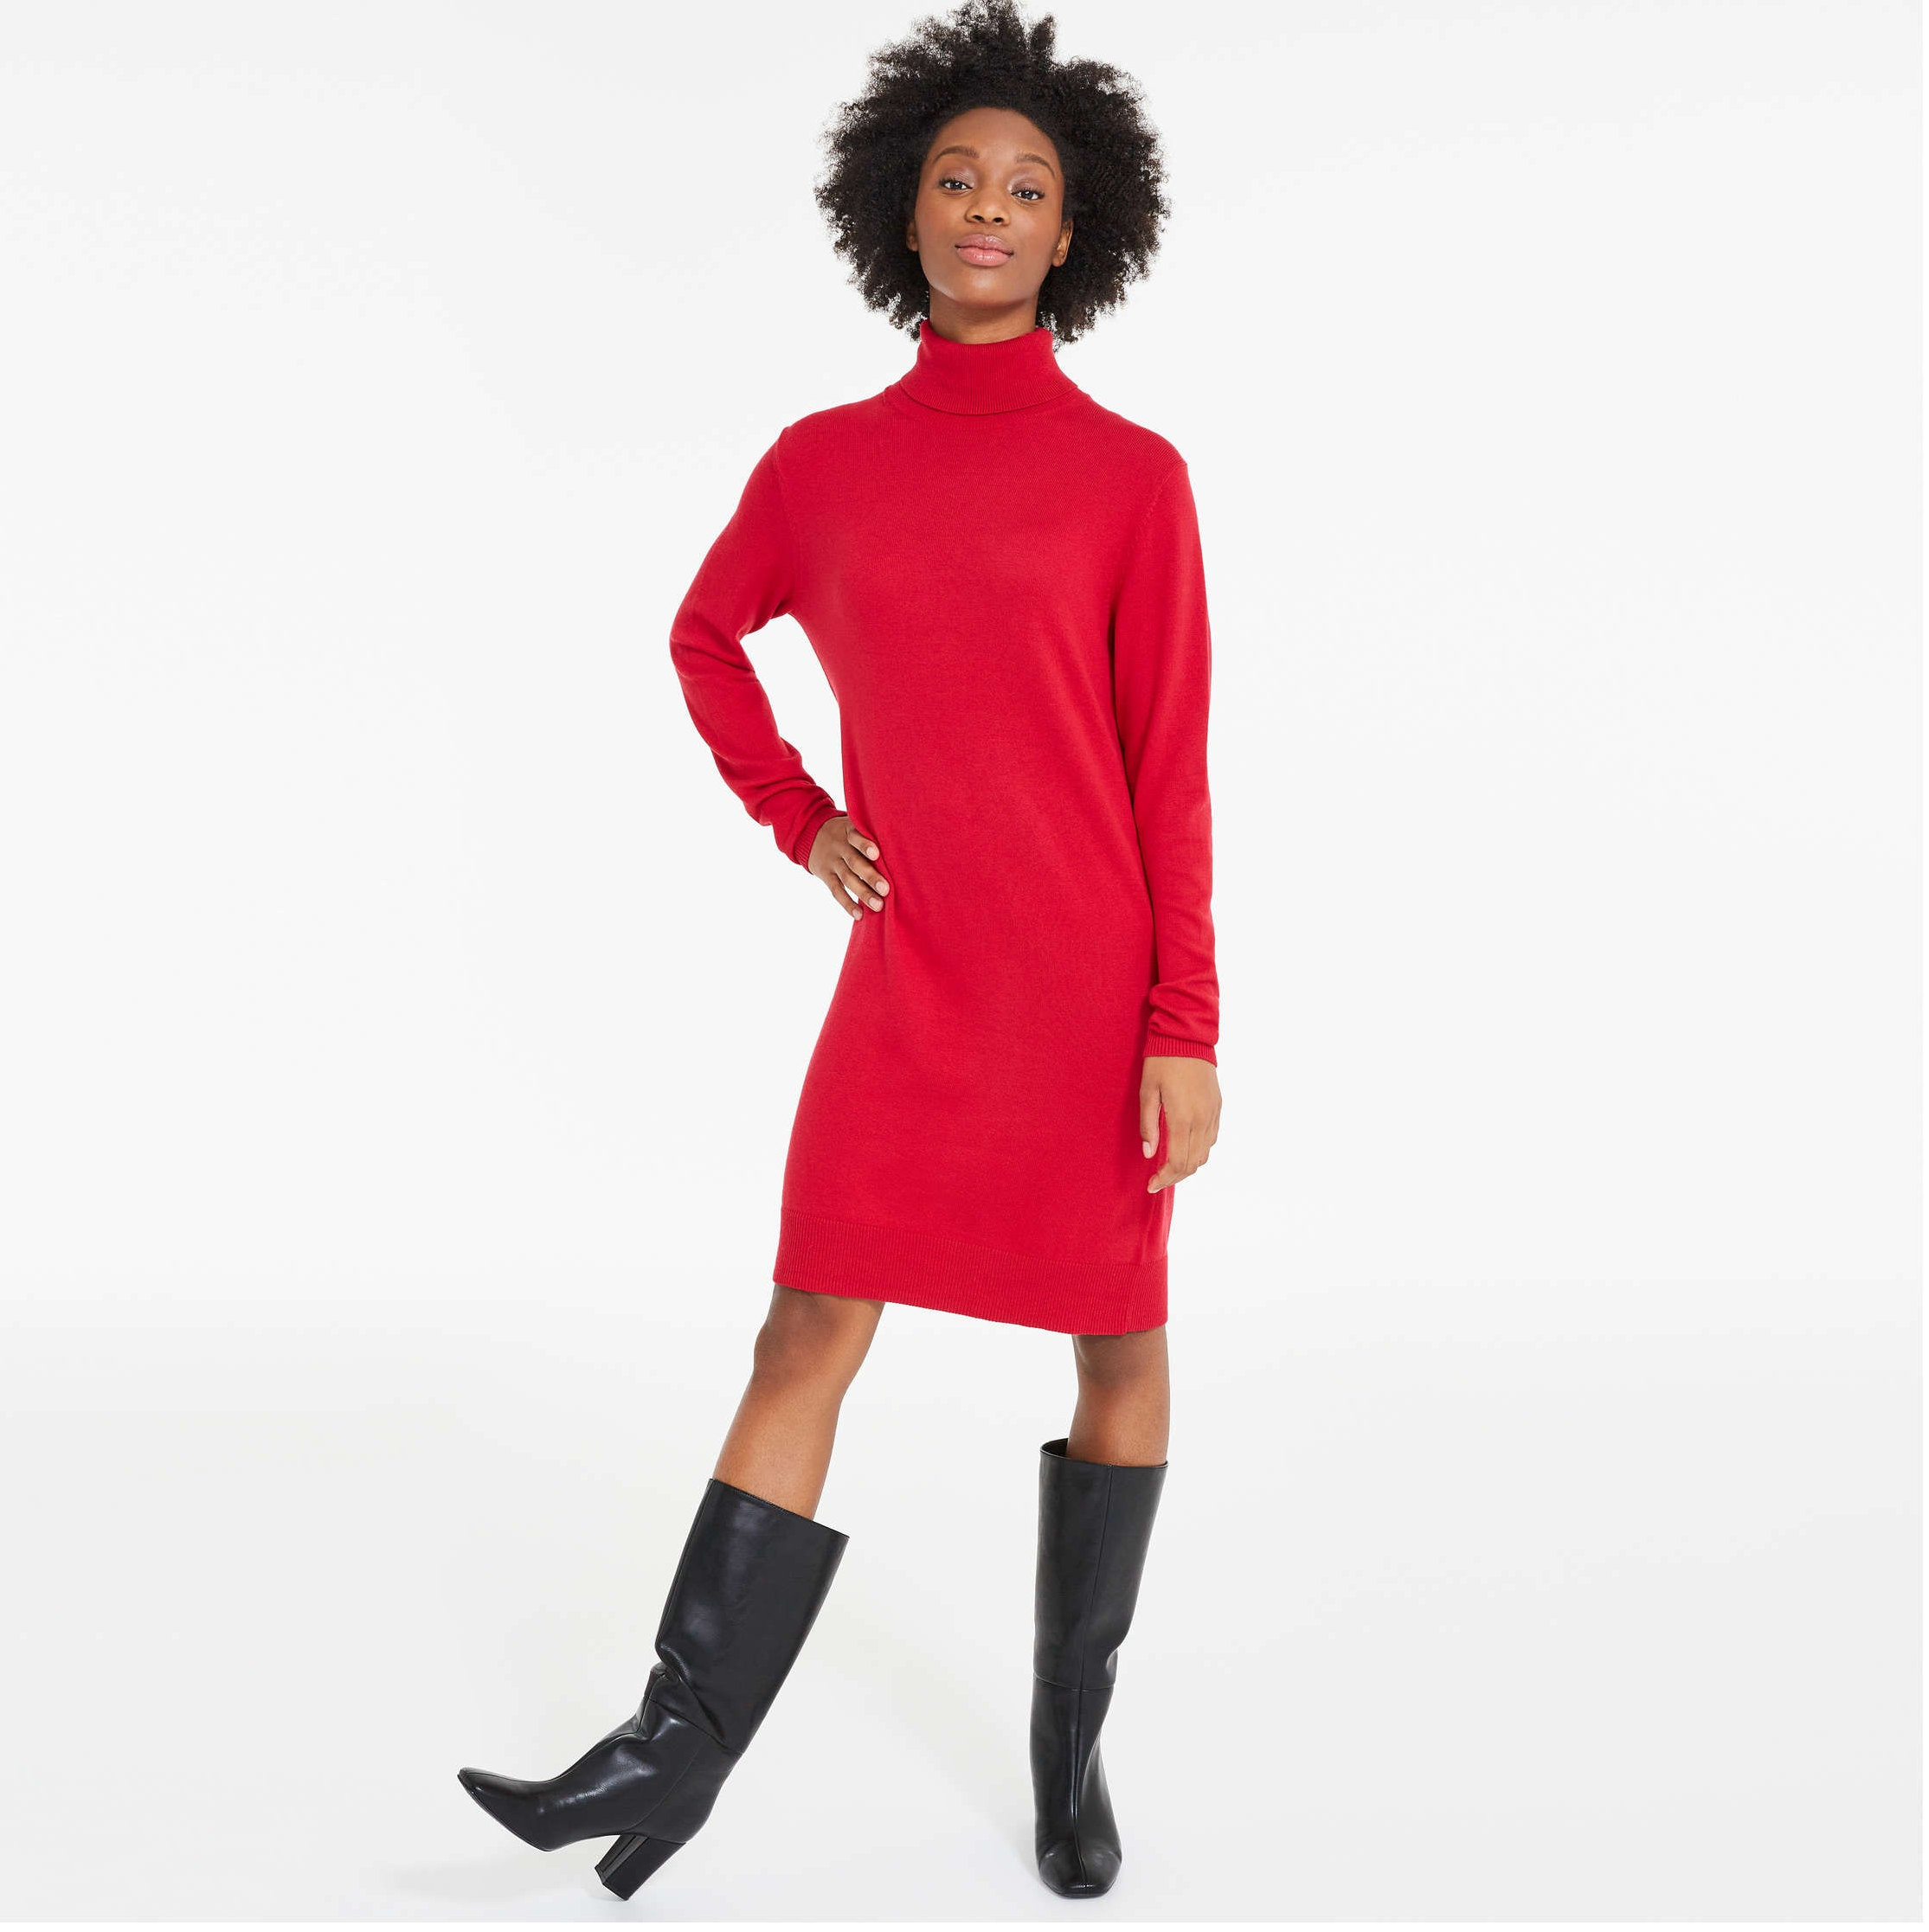 A person wearing a sweater dress with boots